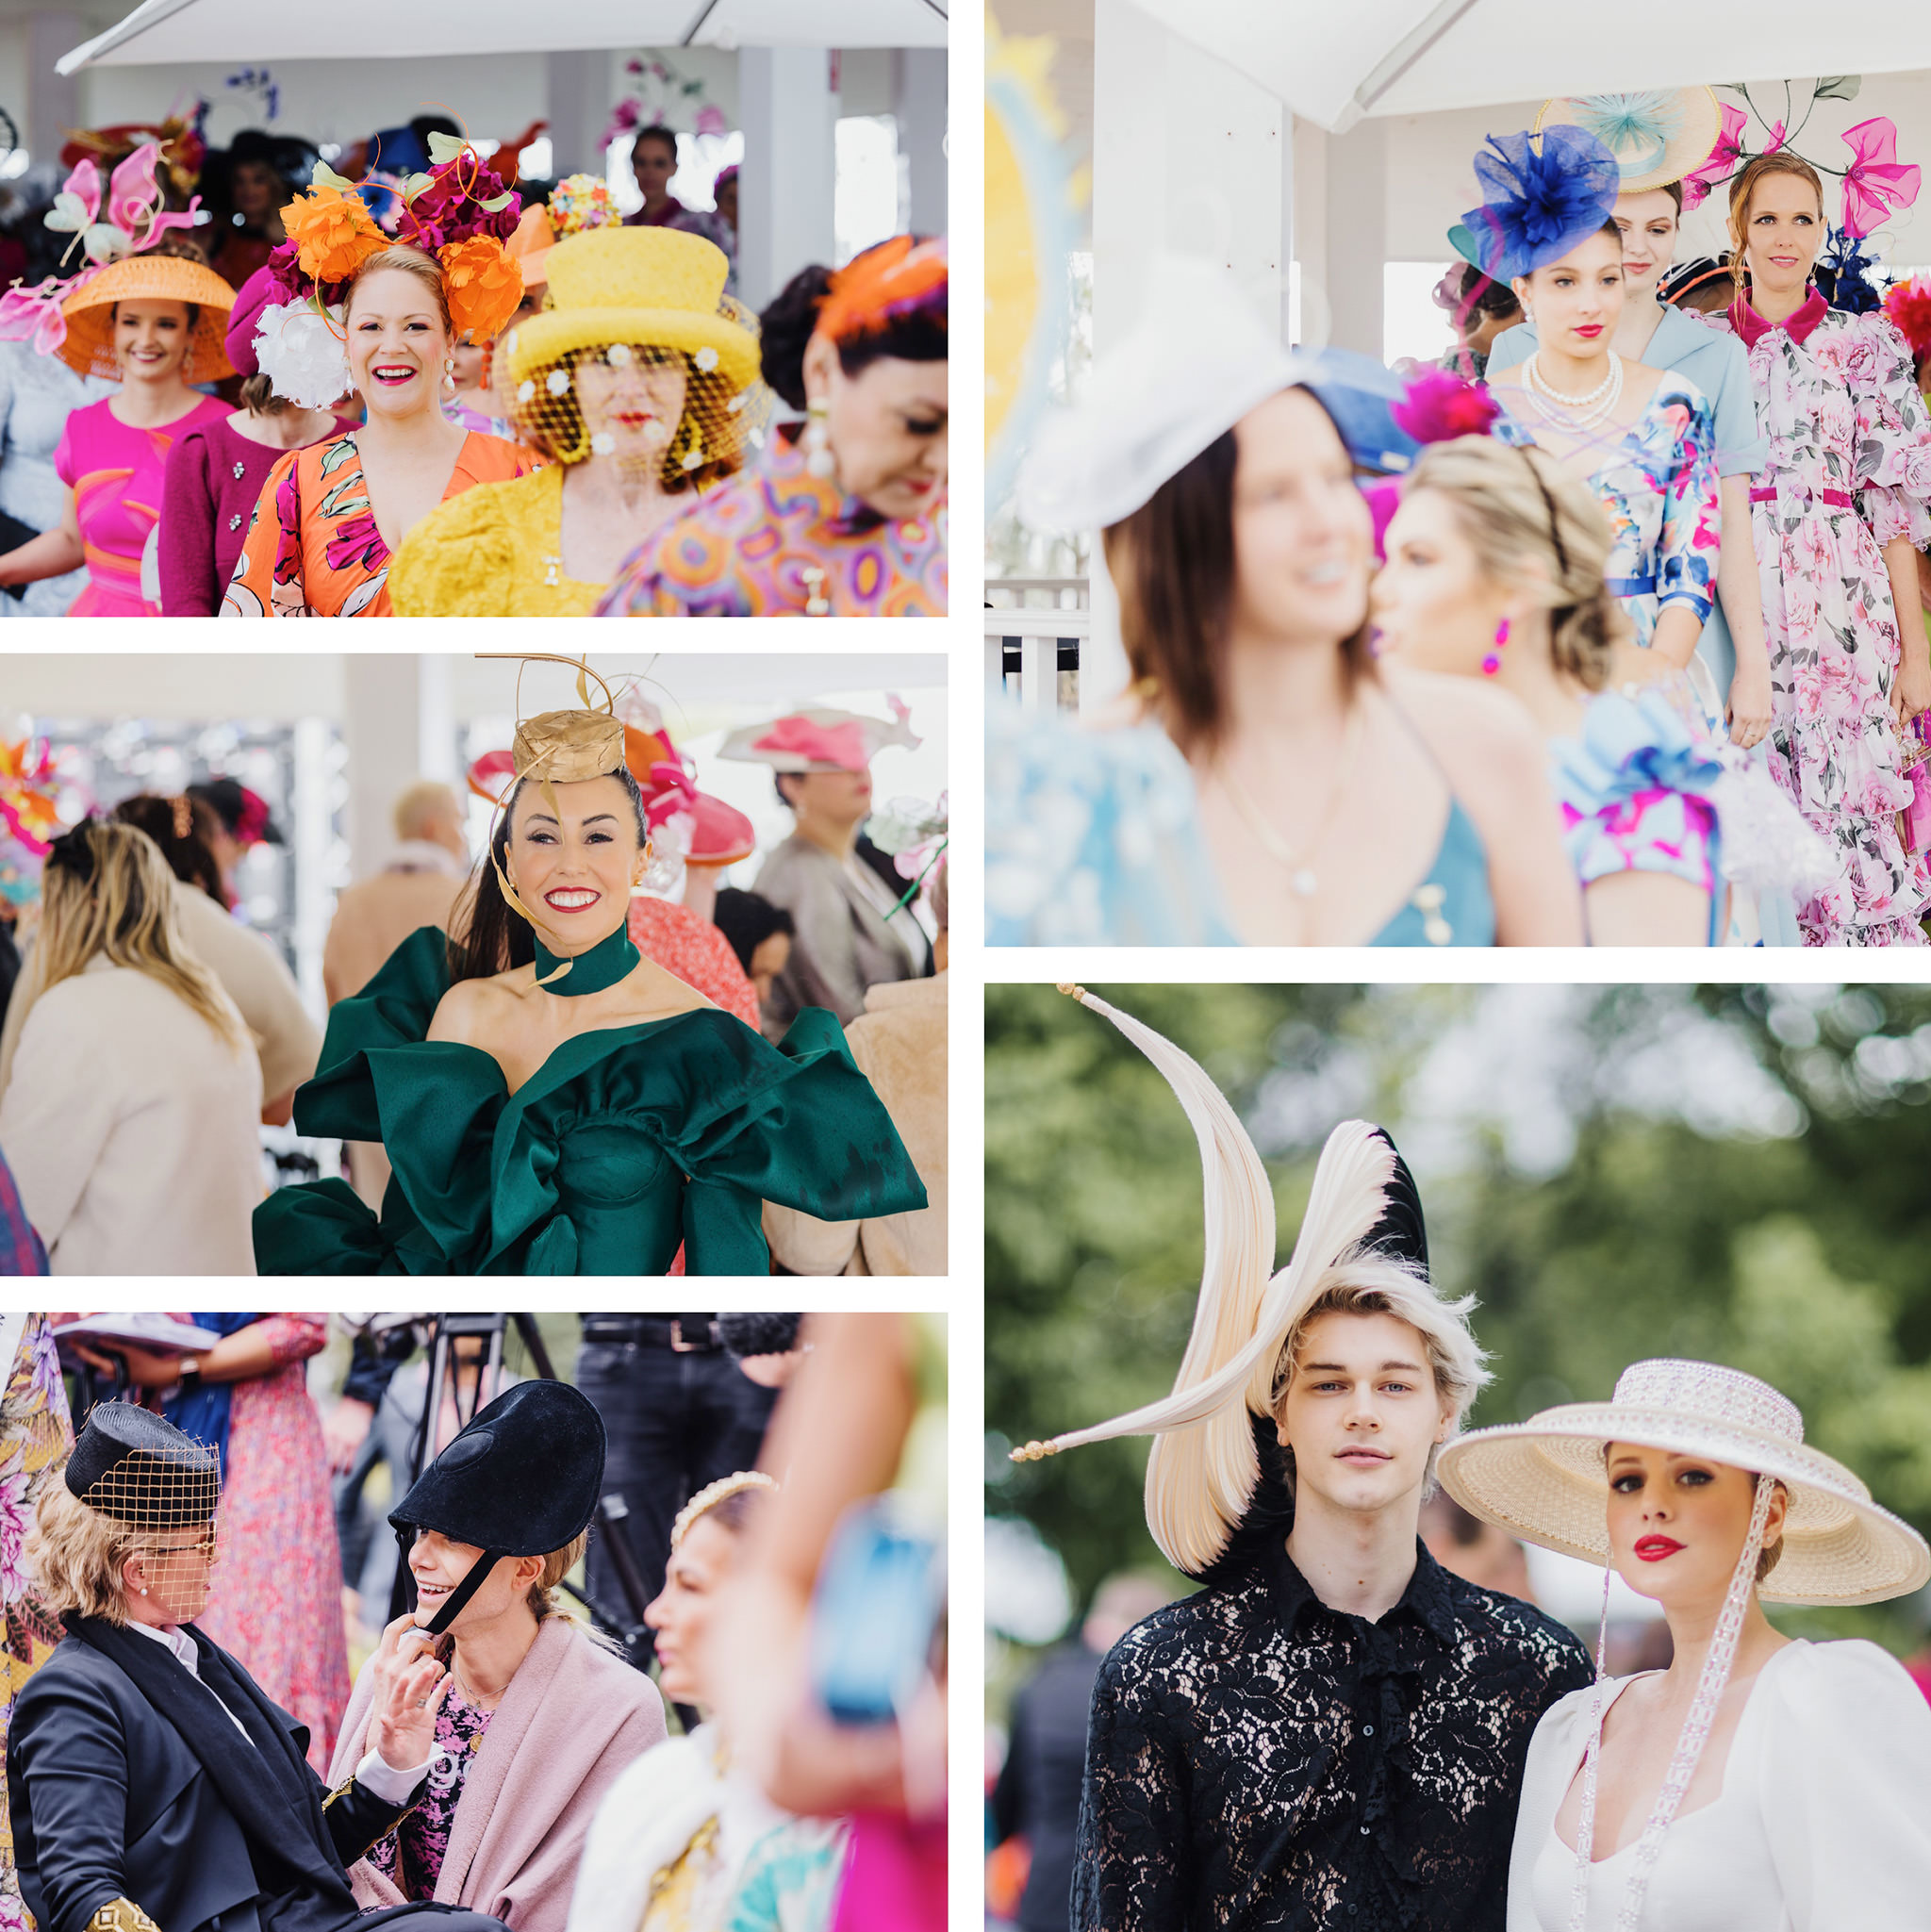 Colour at the races - new fashion trends 2022